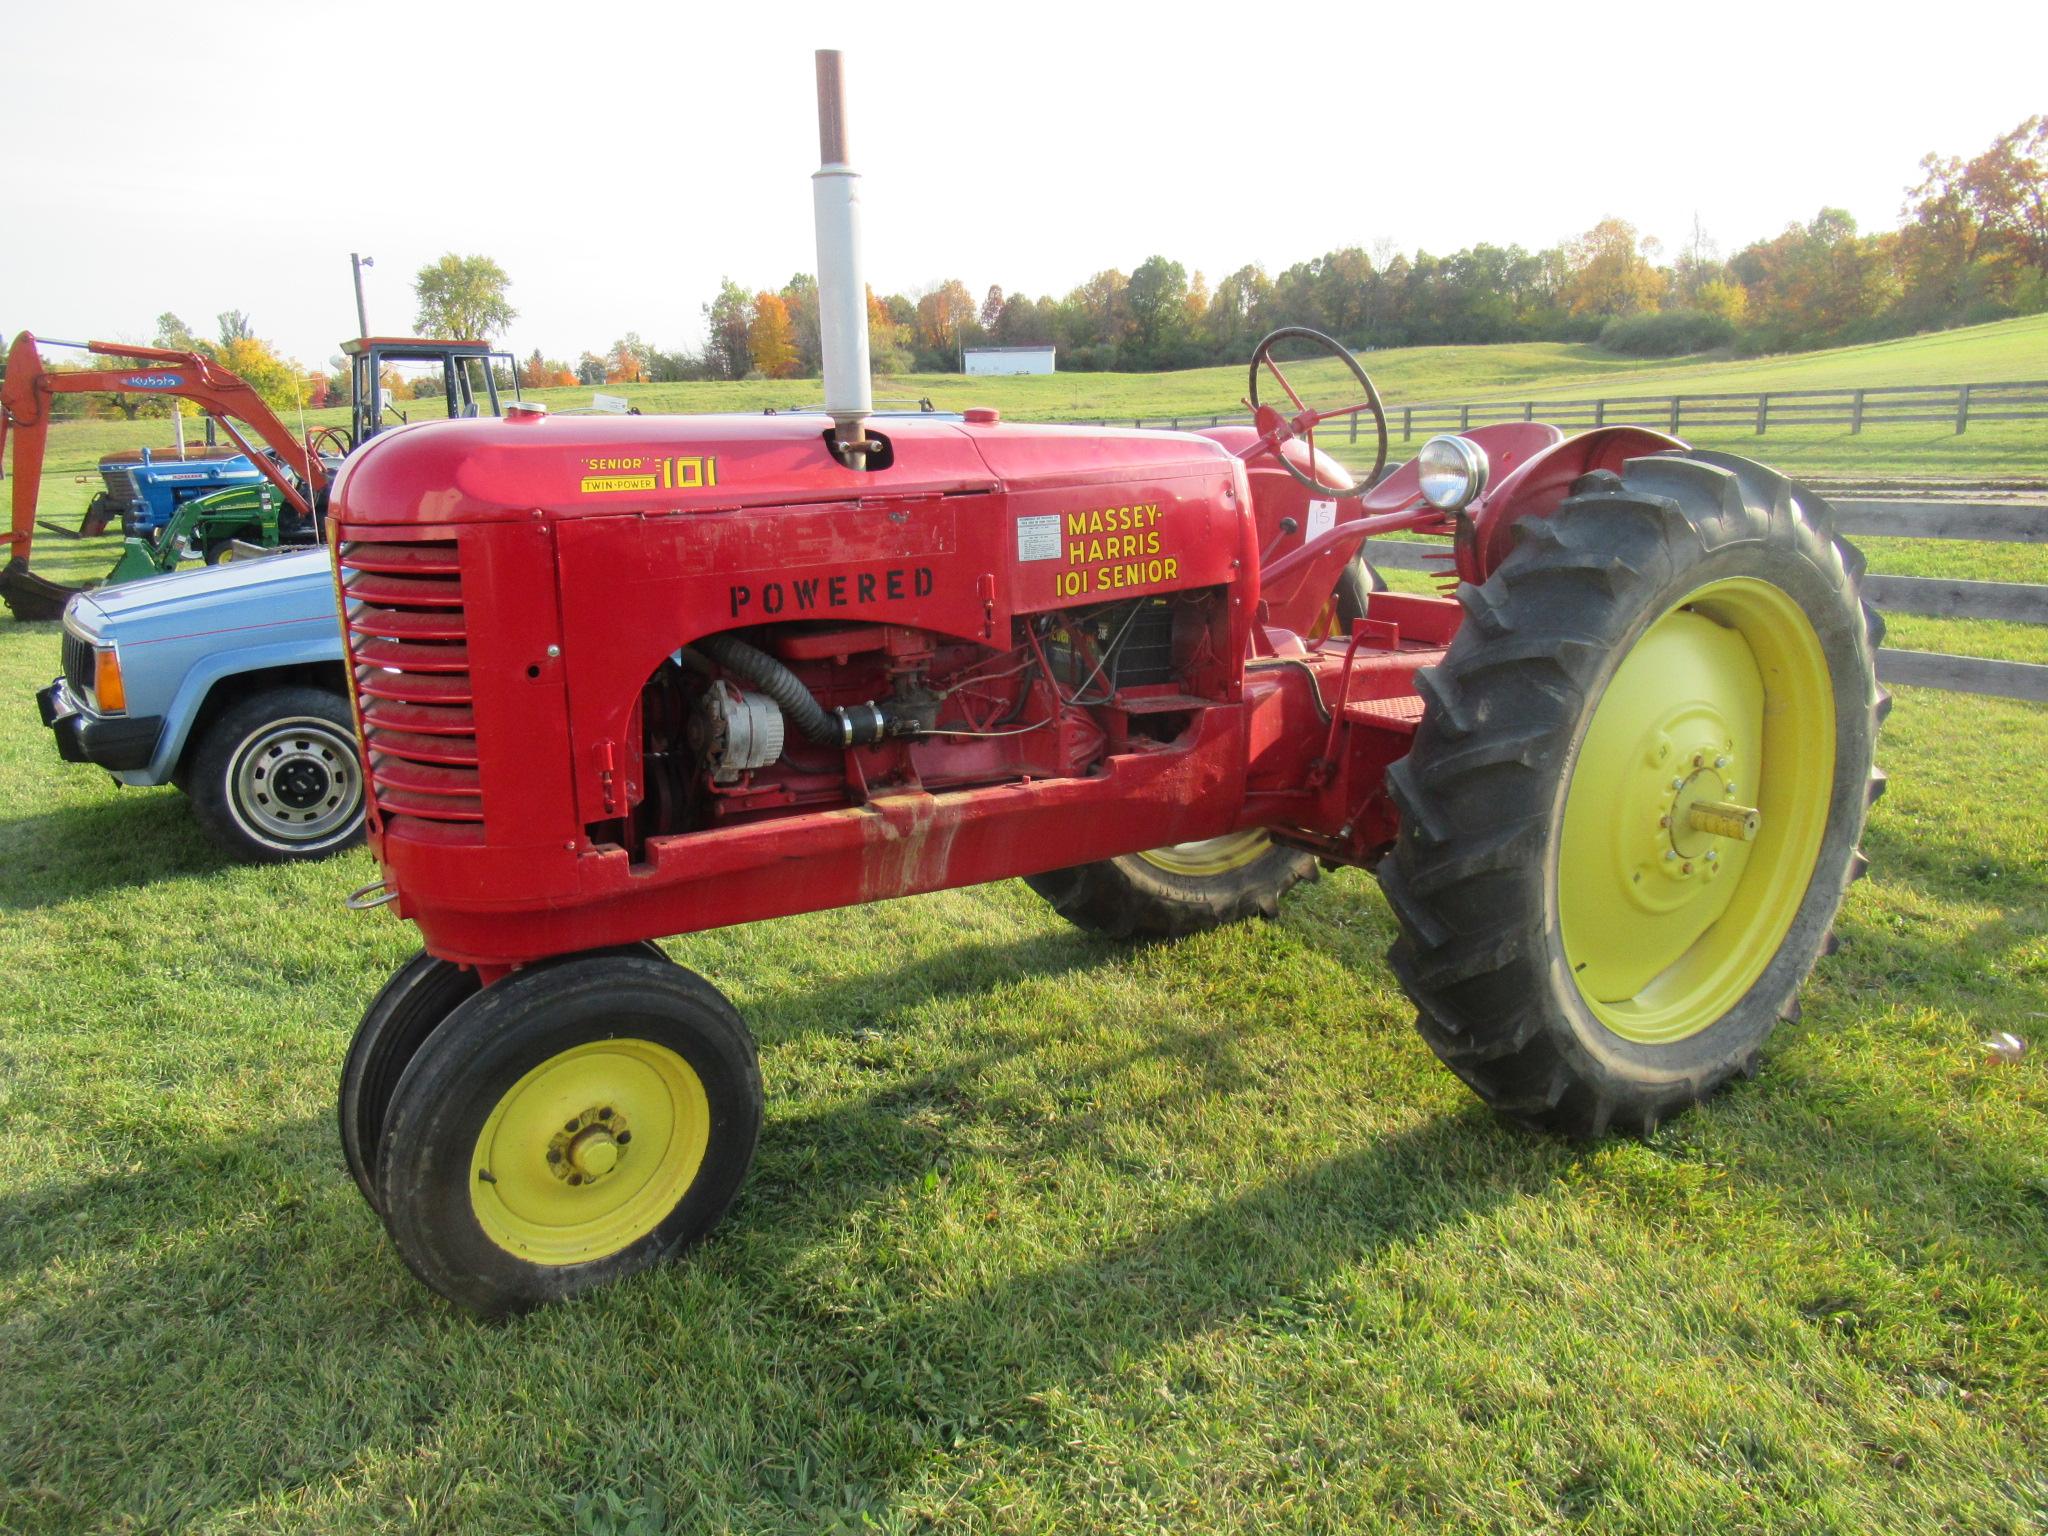 1940's Massey-Harris 1010 Senior Narrow Front Chevy Gas Conversion Tractor.